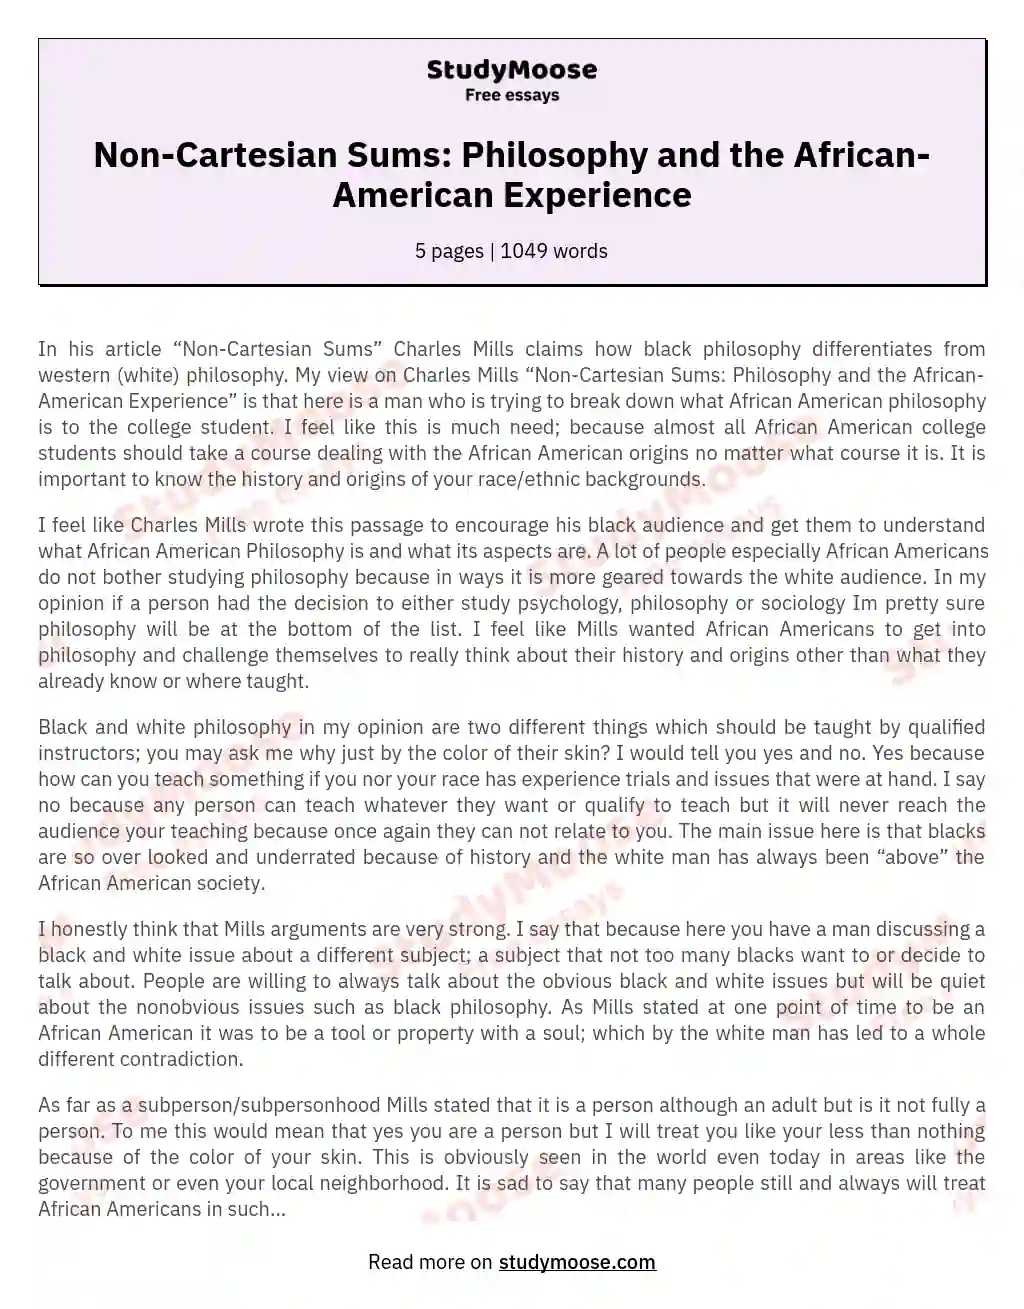 Non-Cartesian Sums: Philosophy and the African-American Experience essay